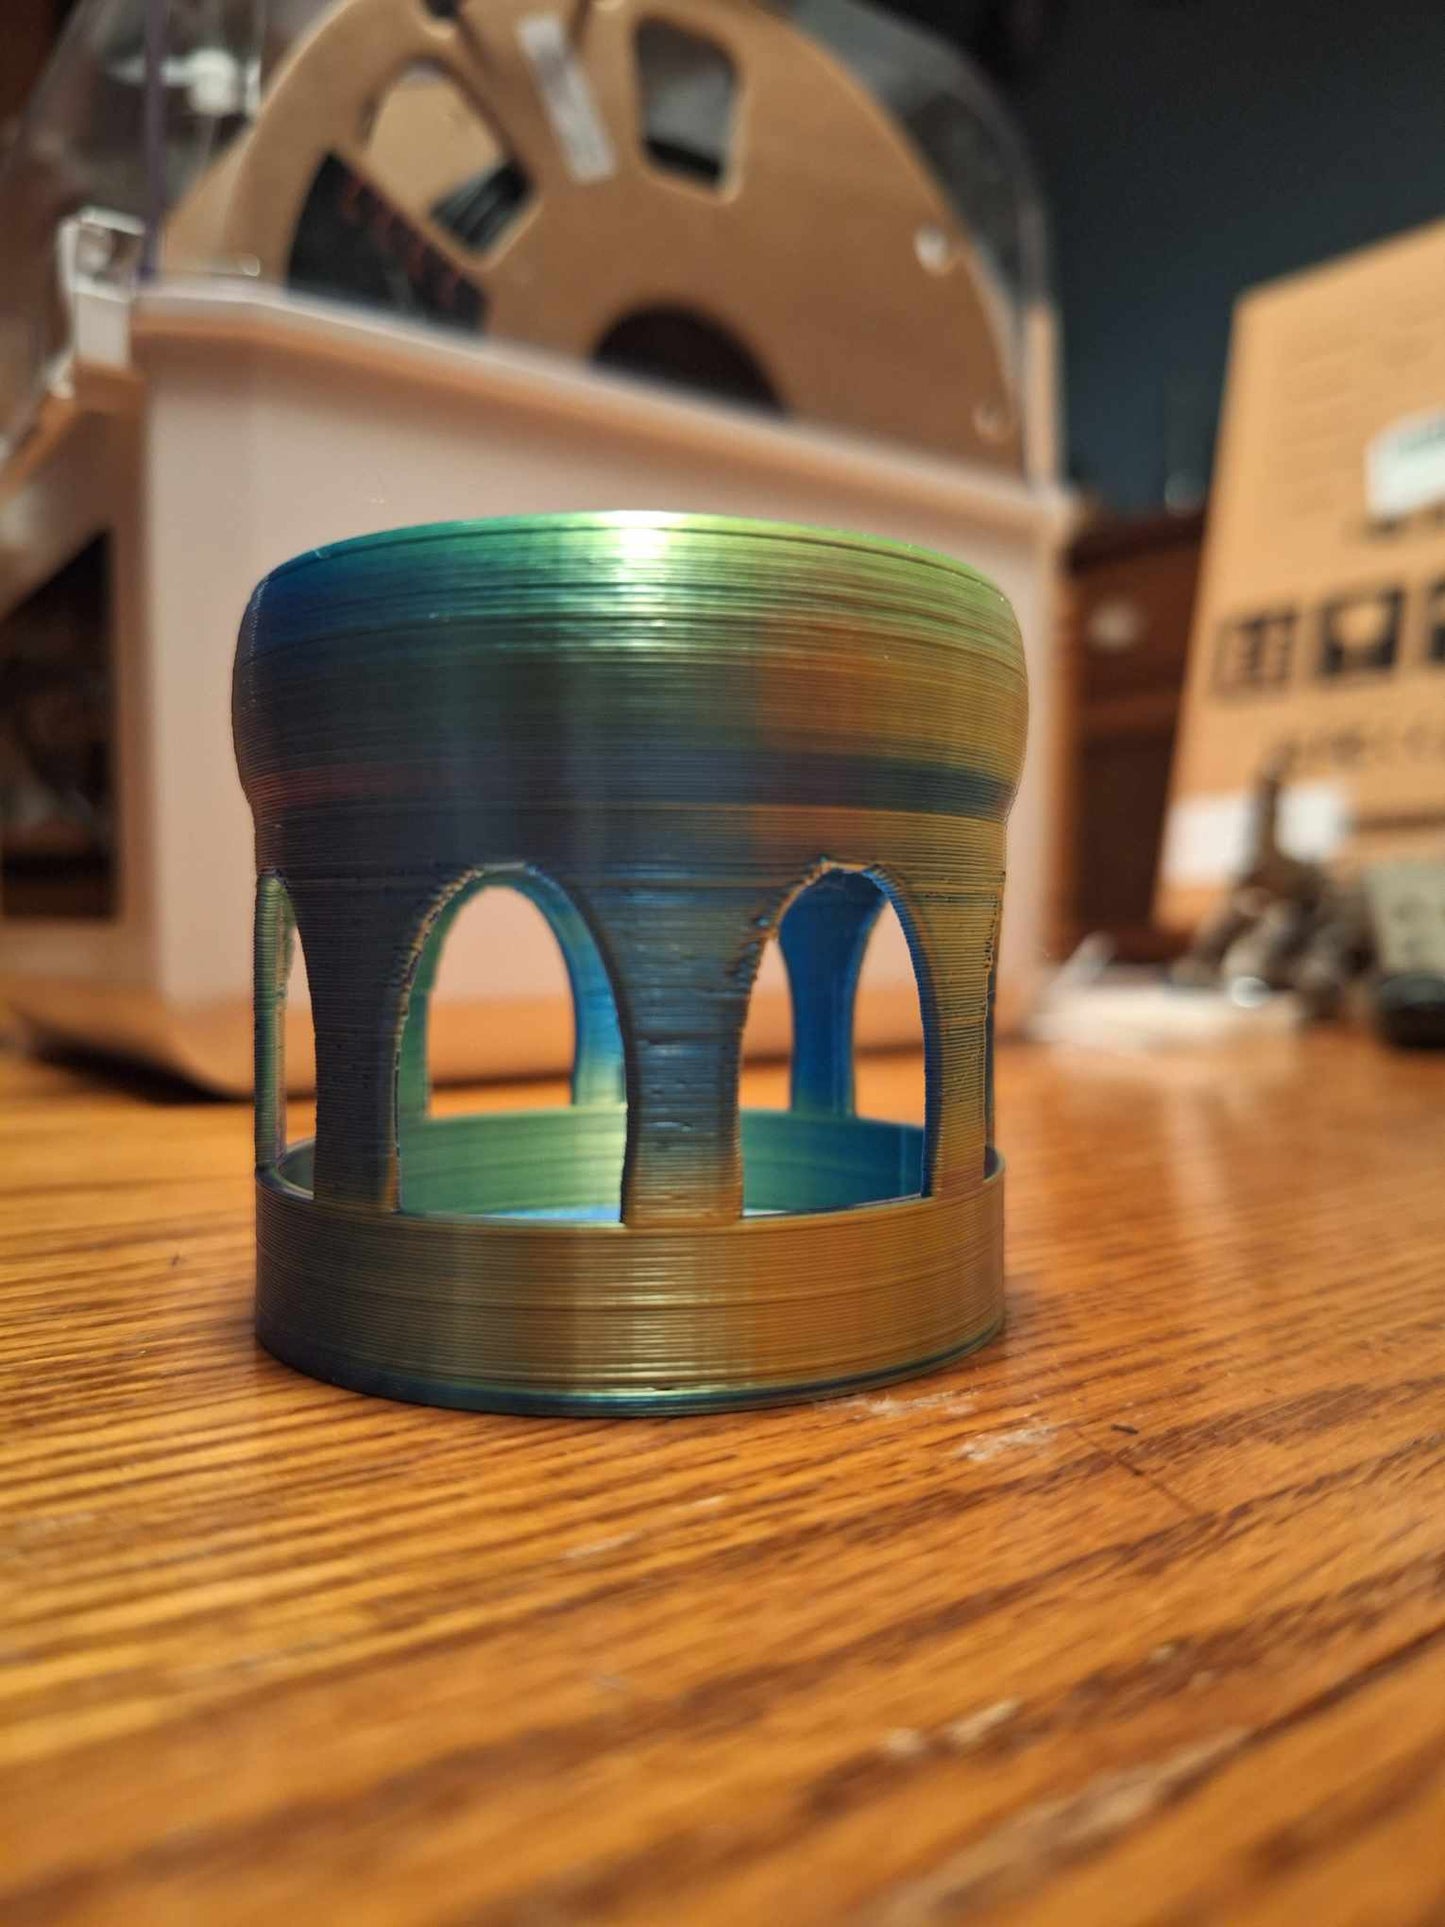 Strikingly colorful Floating Shrimp Gazebo Feeder 3D-printed with Aceaddity tri-color silk PLA in shades of blue, yellow, and purple, placed on a wooden surface with a Sovol filament dryer in the blurry background.